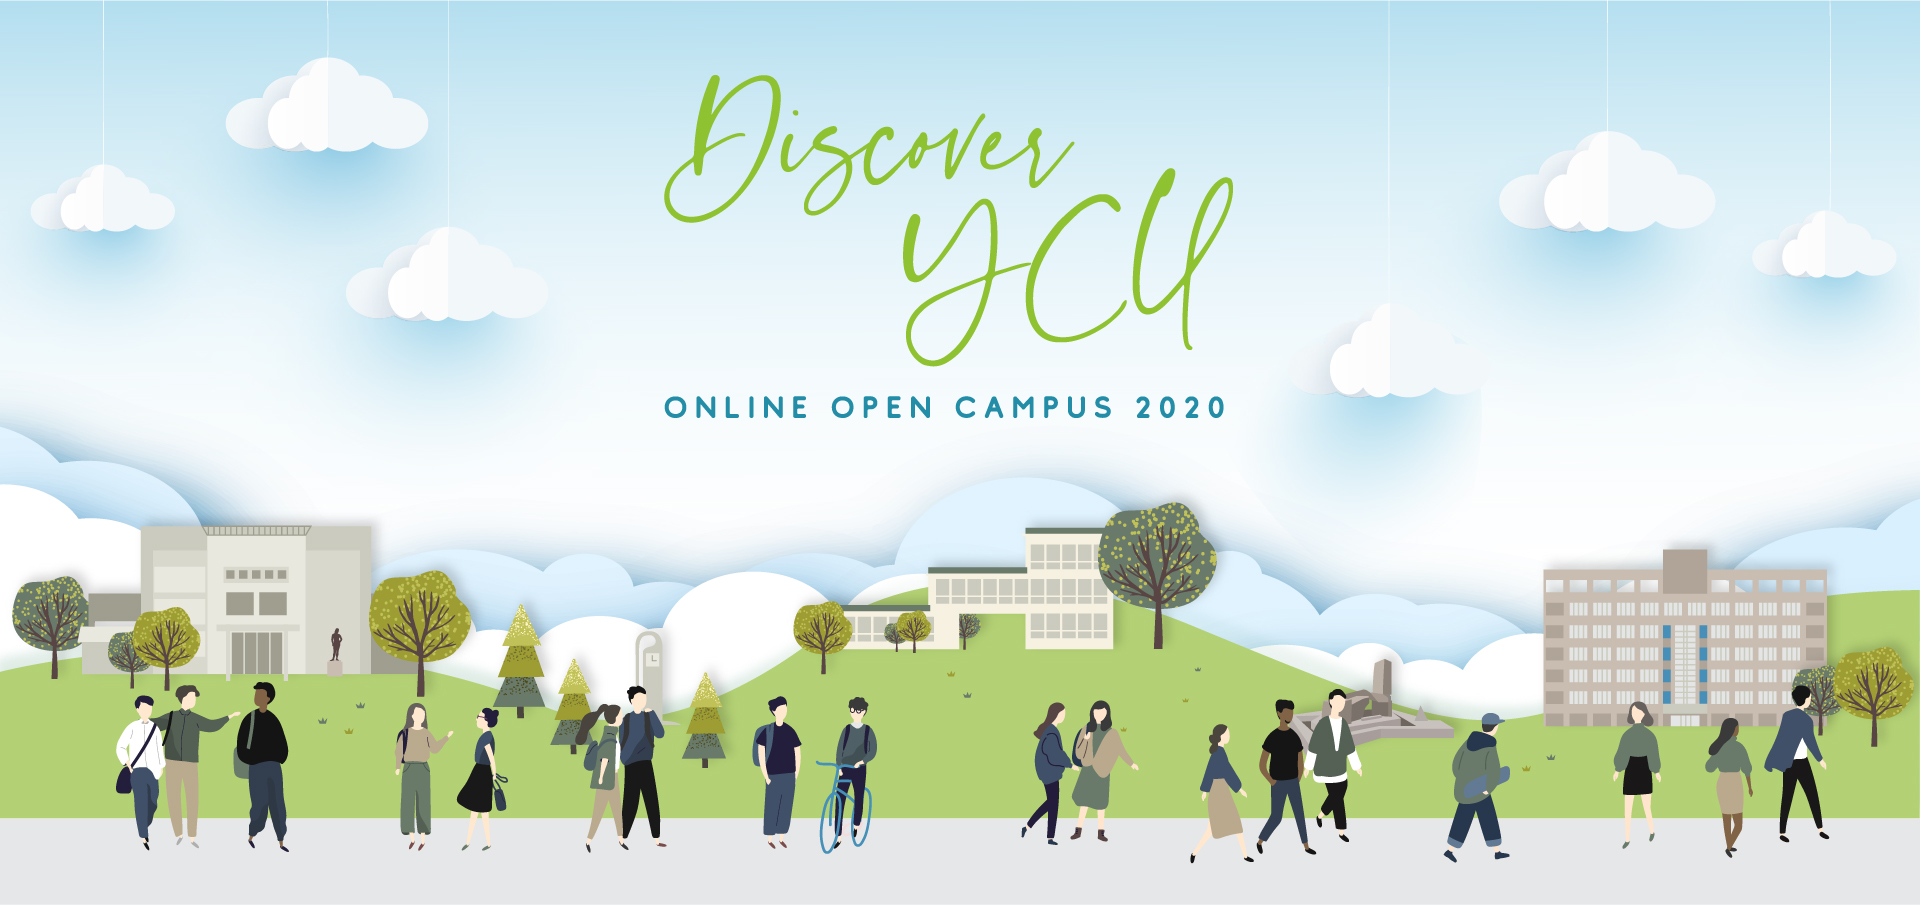 Discover YCU ONLINE OPEN CAMPUS 2020